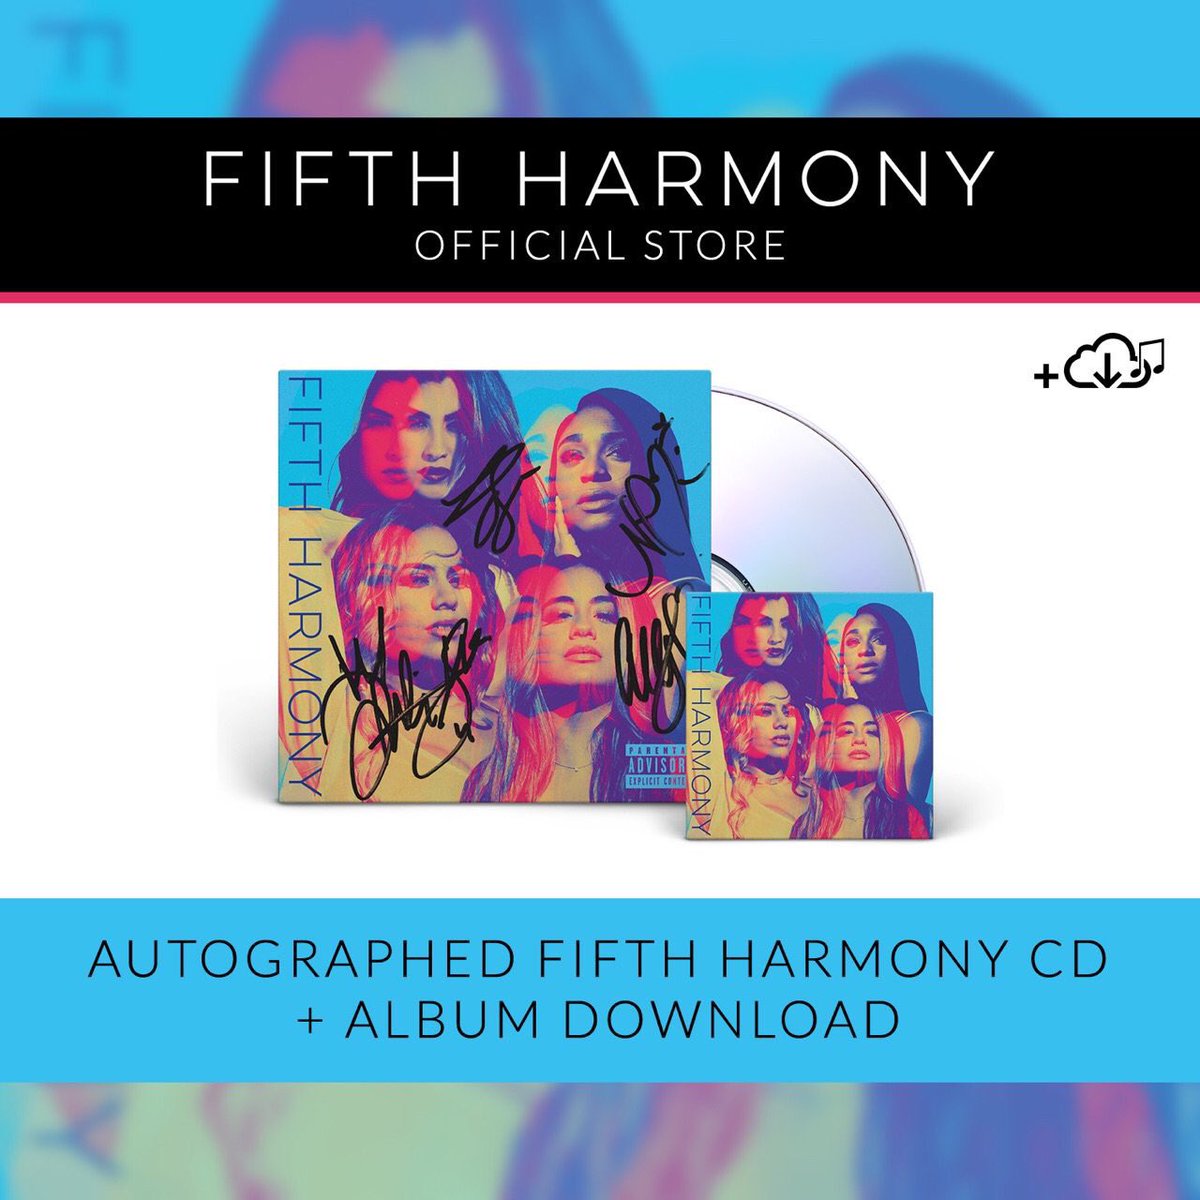 Lil mamas! Signed CDs are available at fifthharmony.co/D2Cstore ❤️ Get one before they're gone!